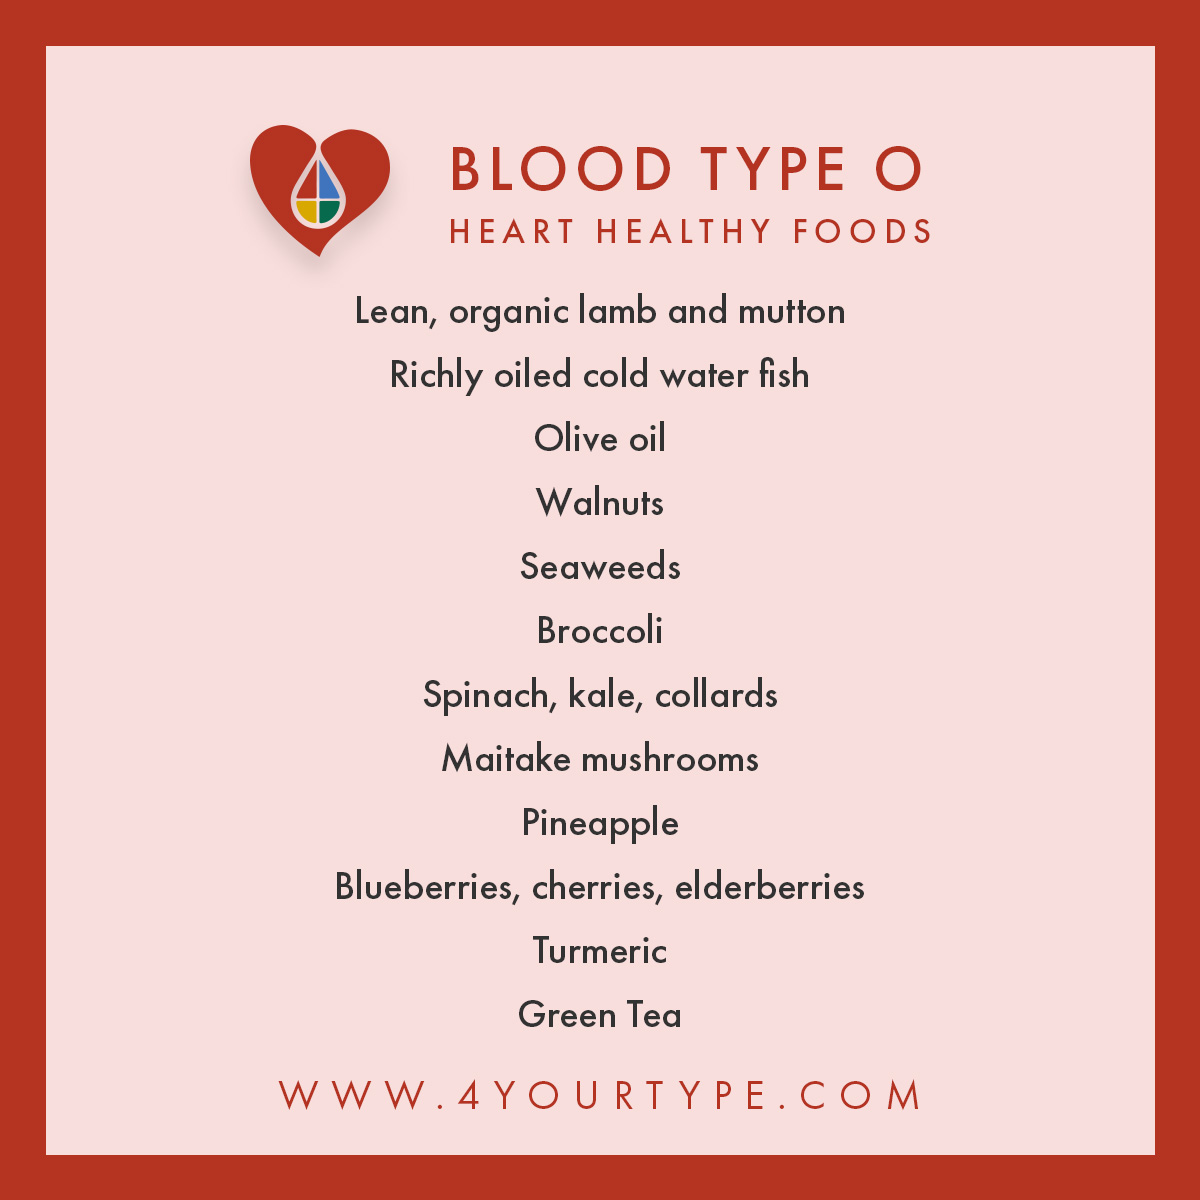 Heart healthy foods blood type O